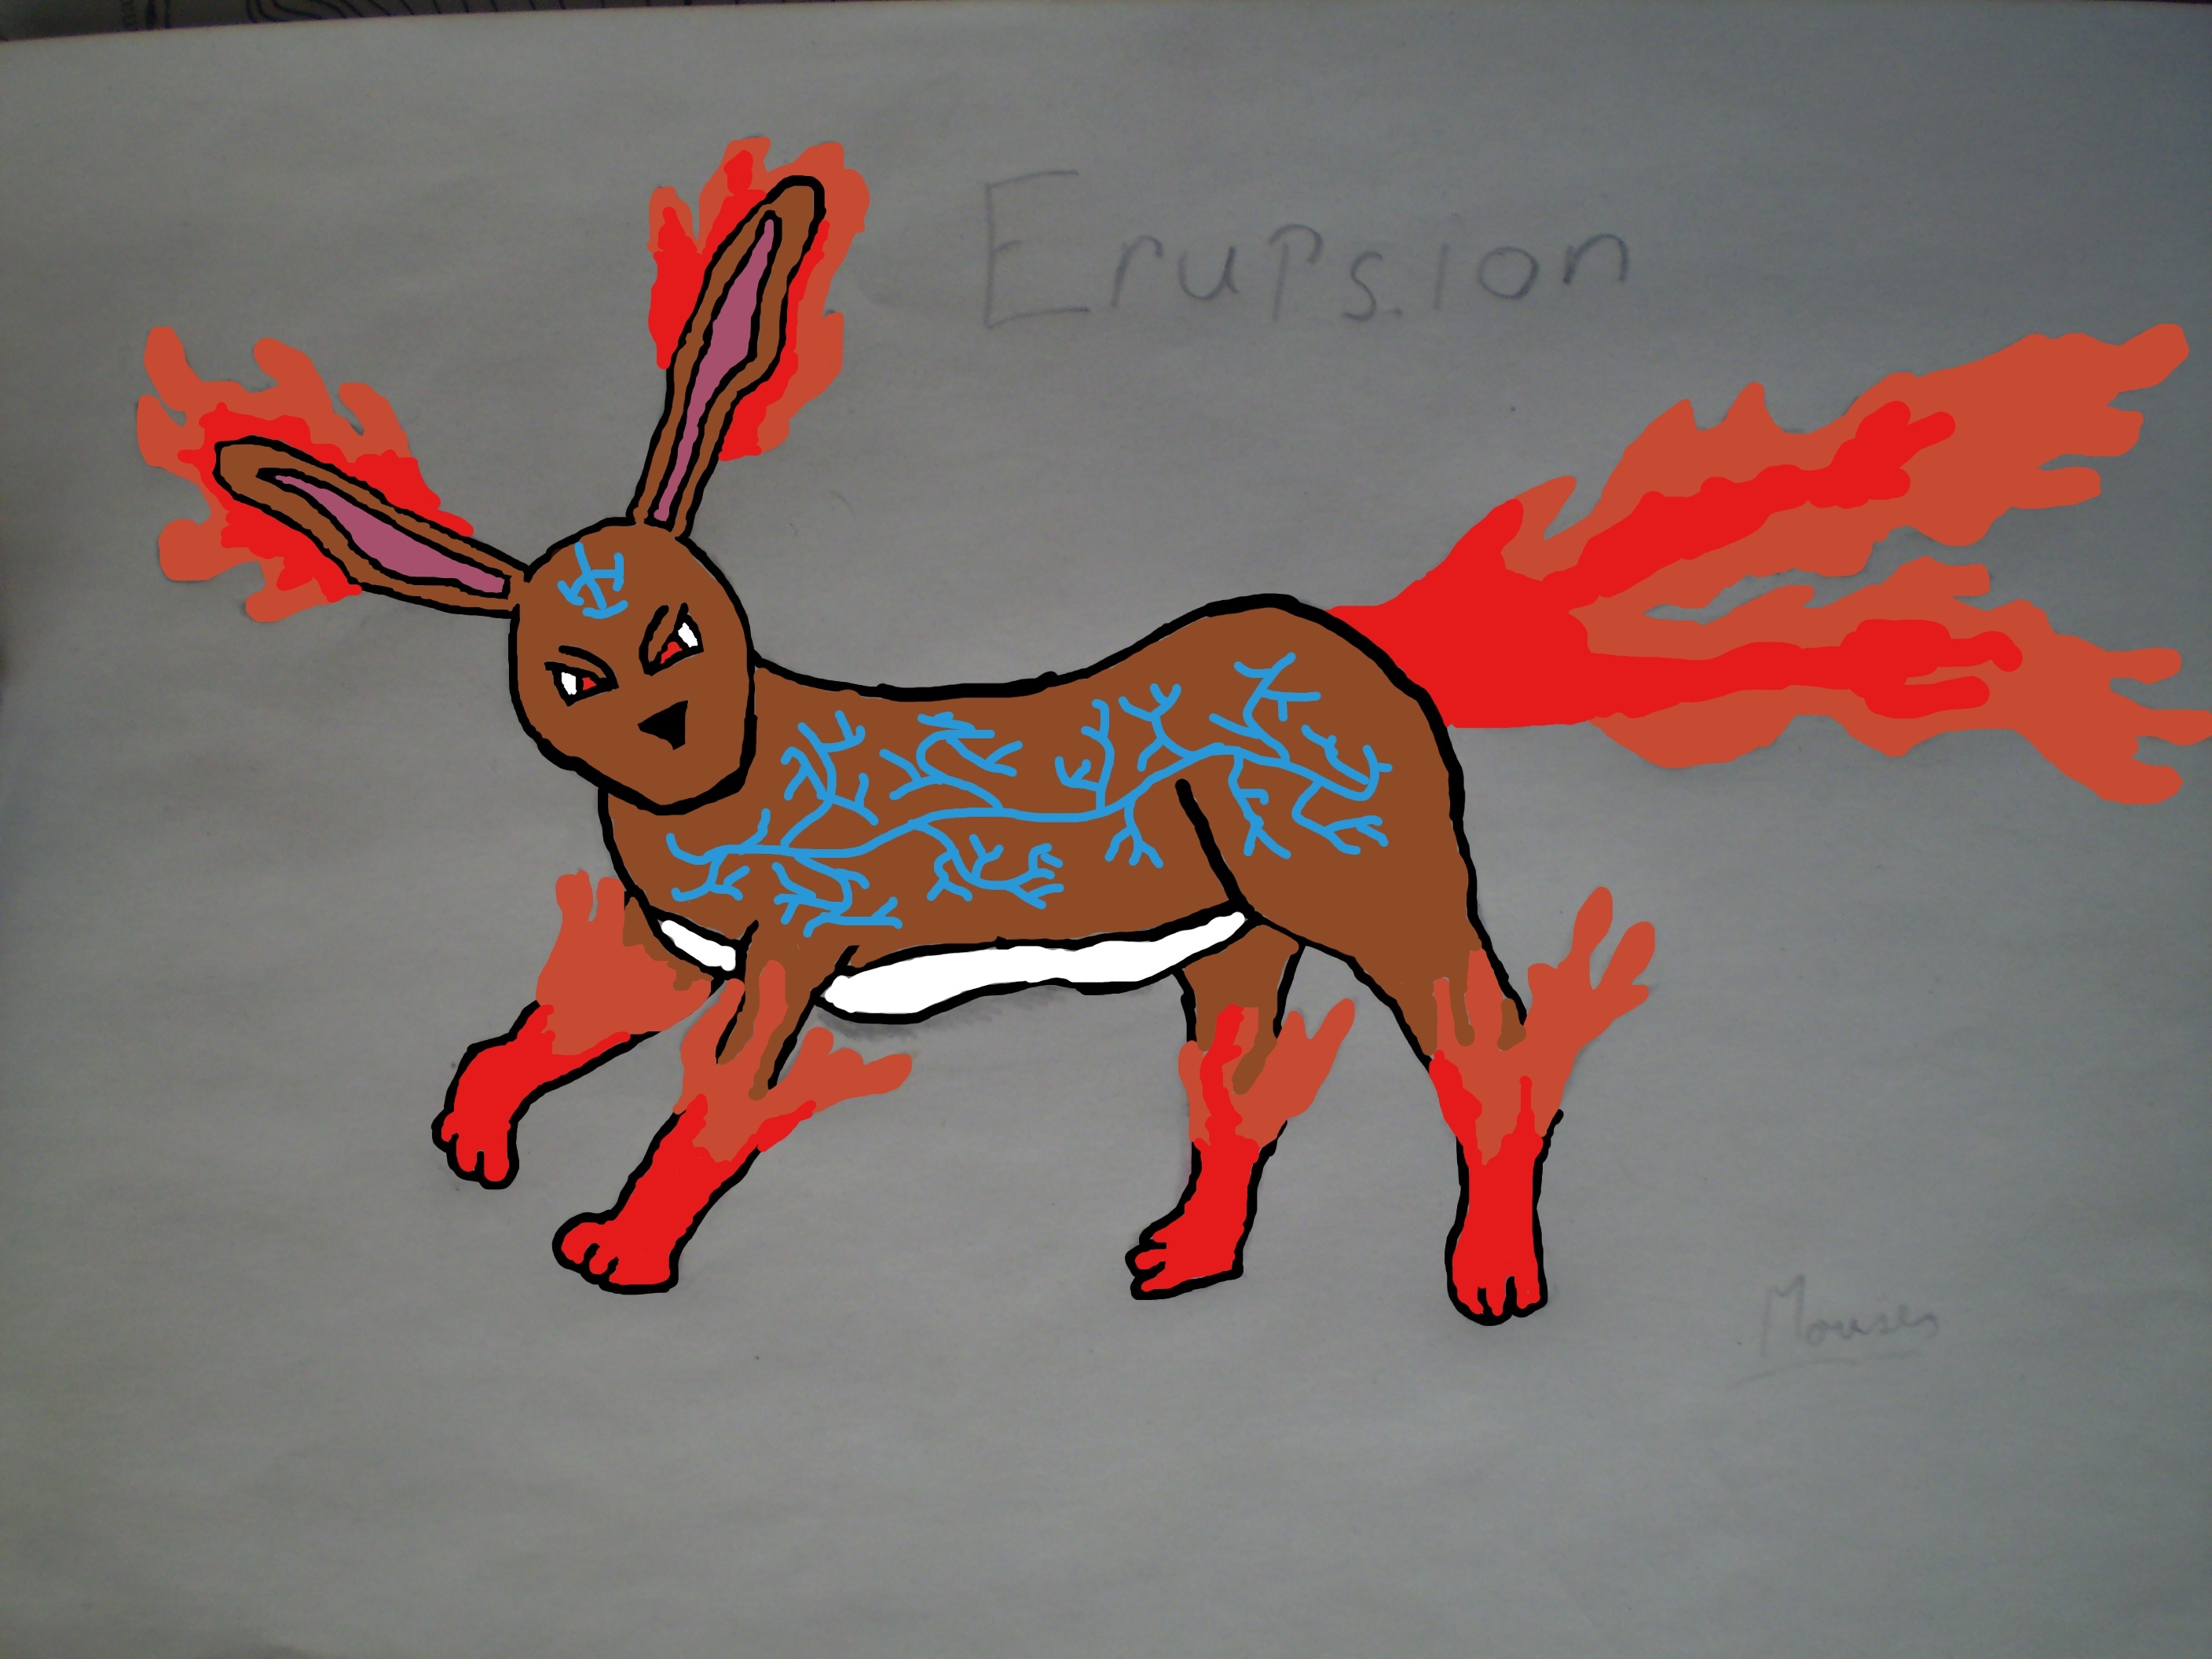 Mouse: Erupsion